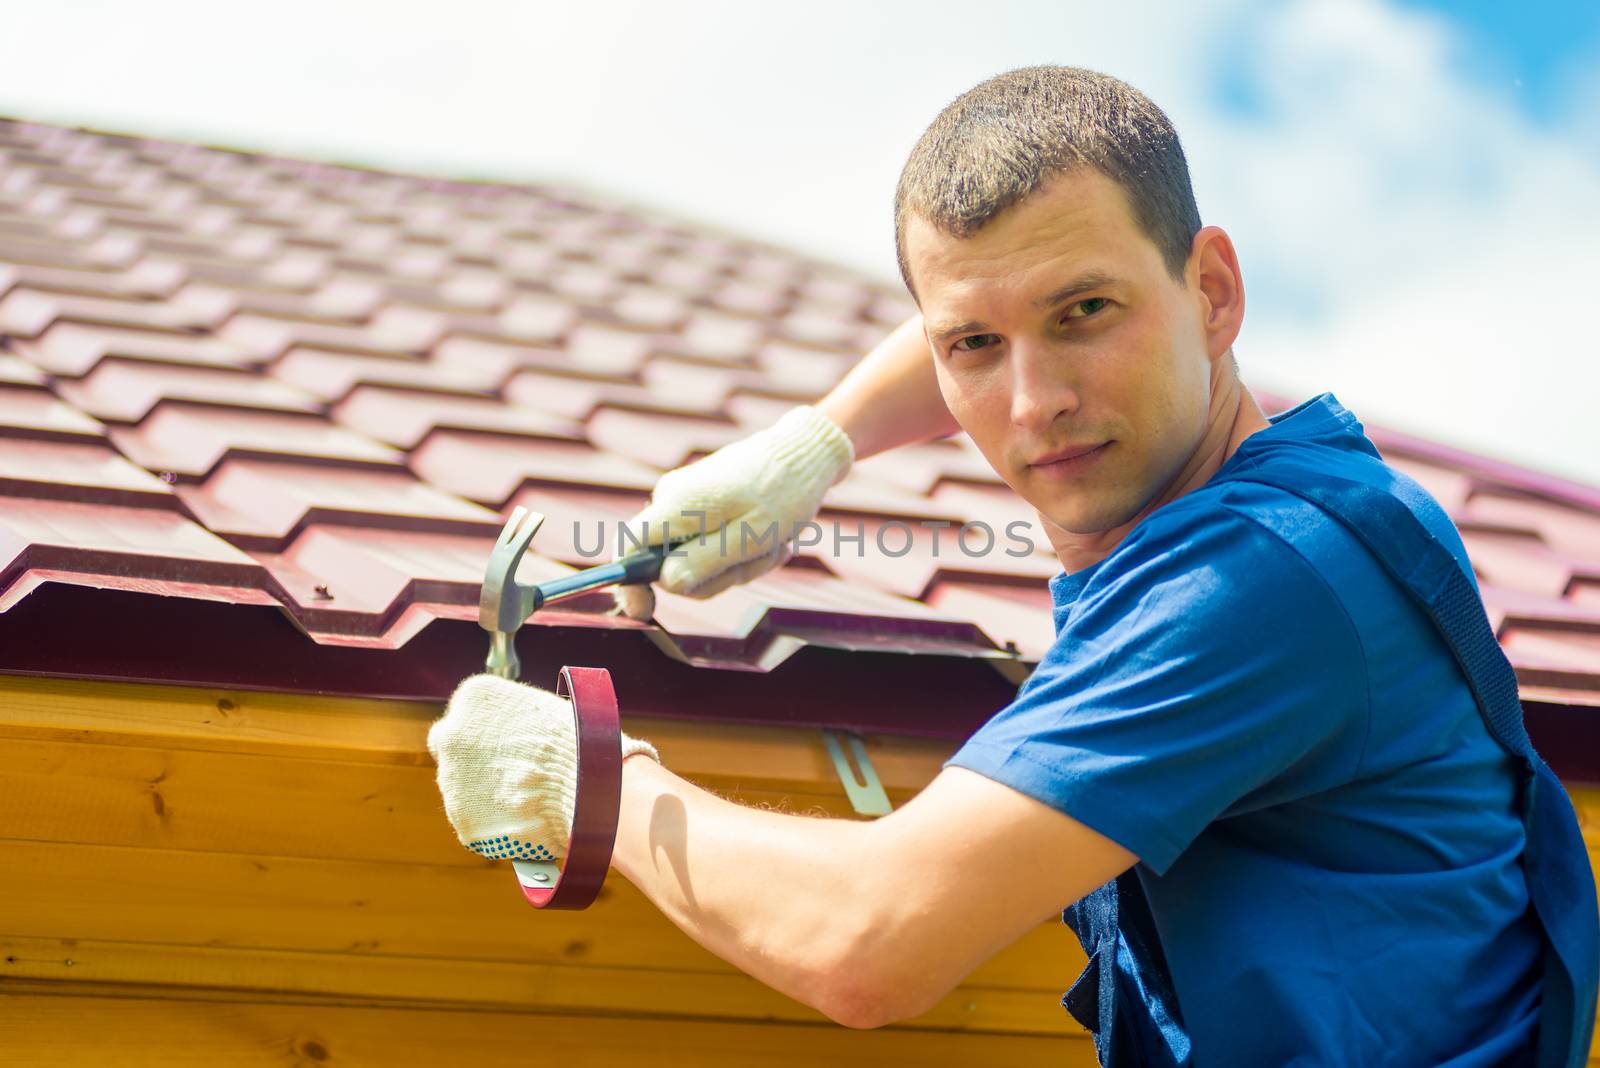 Portrait of a male repairman engaged in repairing a roof of a house, a portrait against a tile